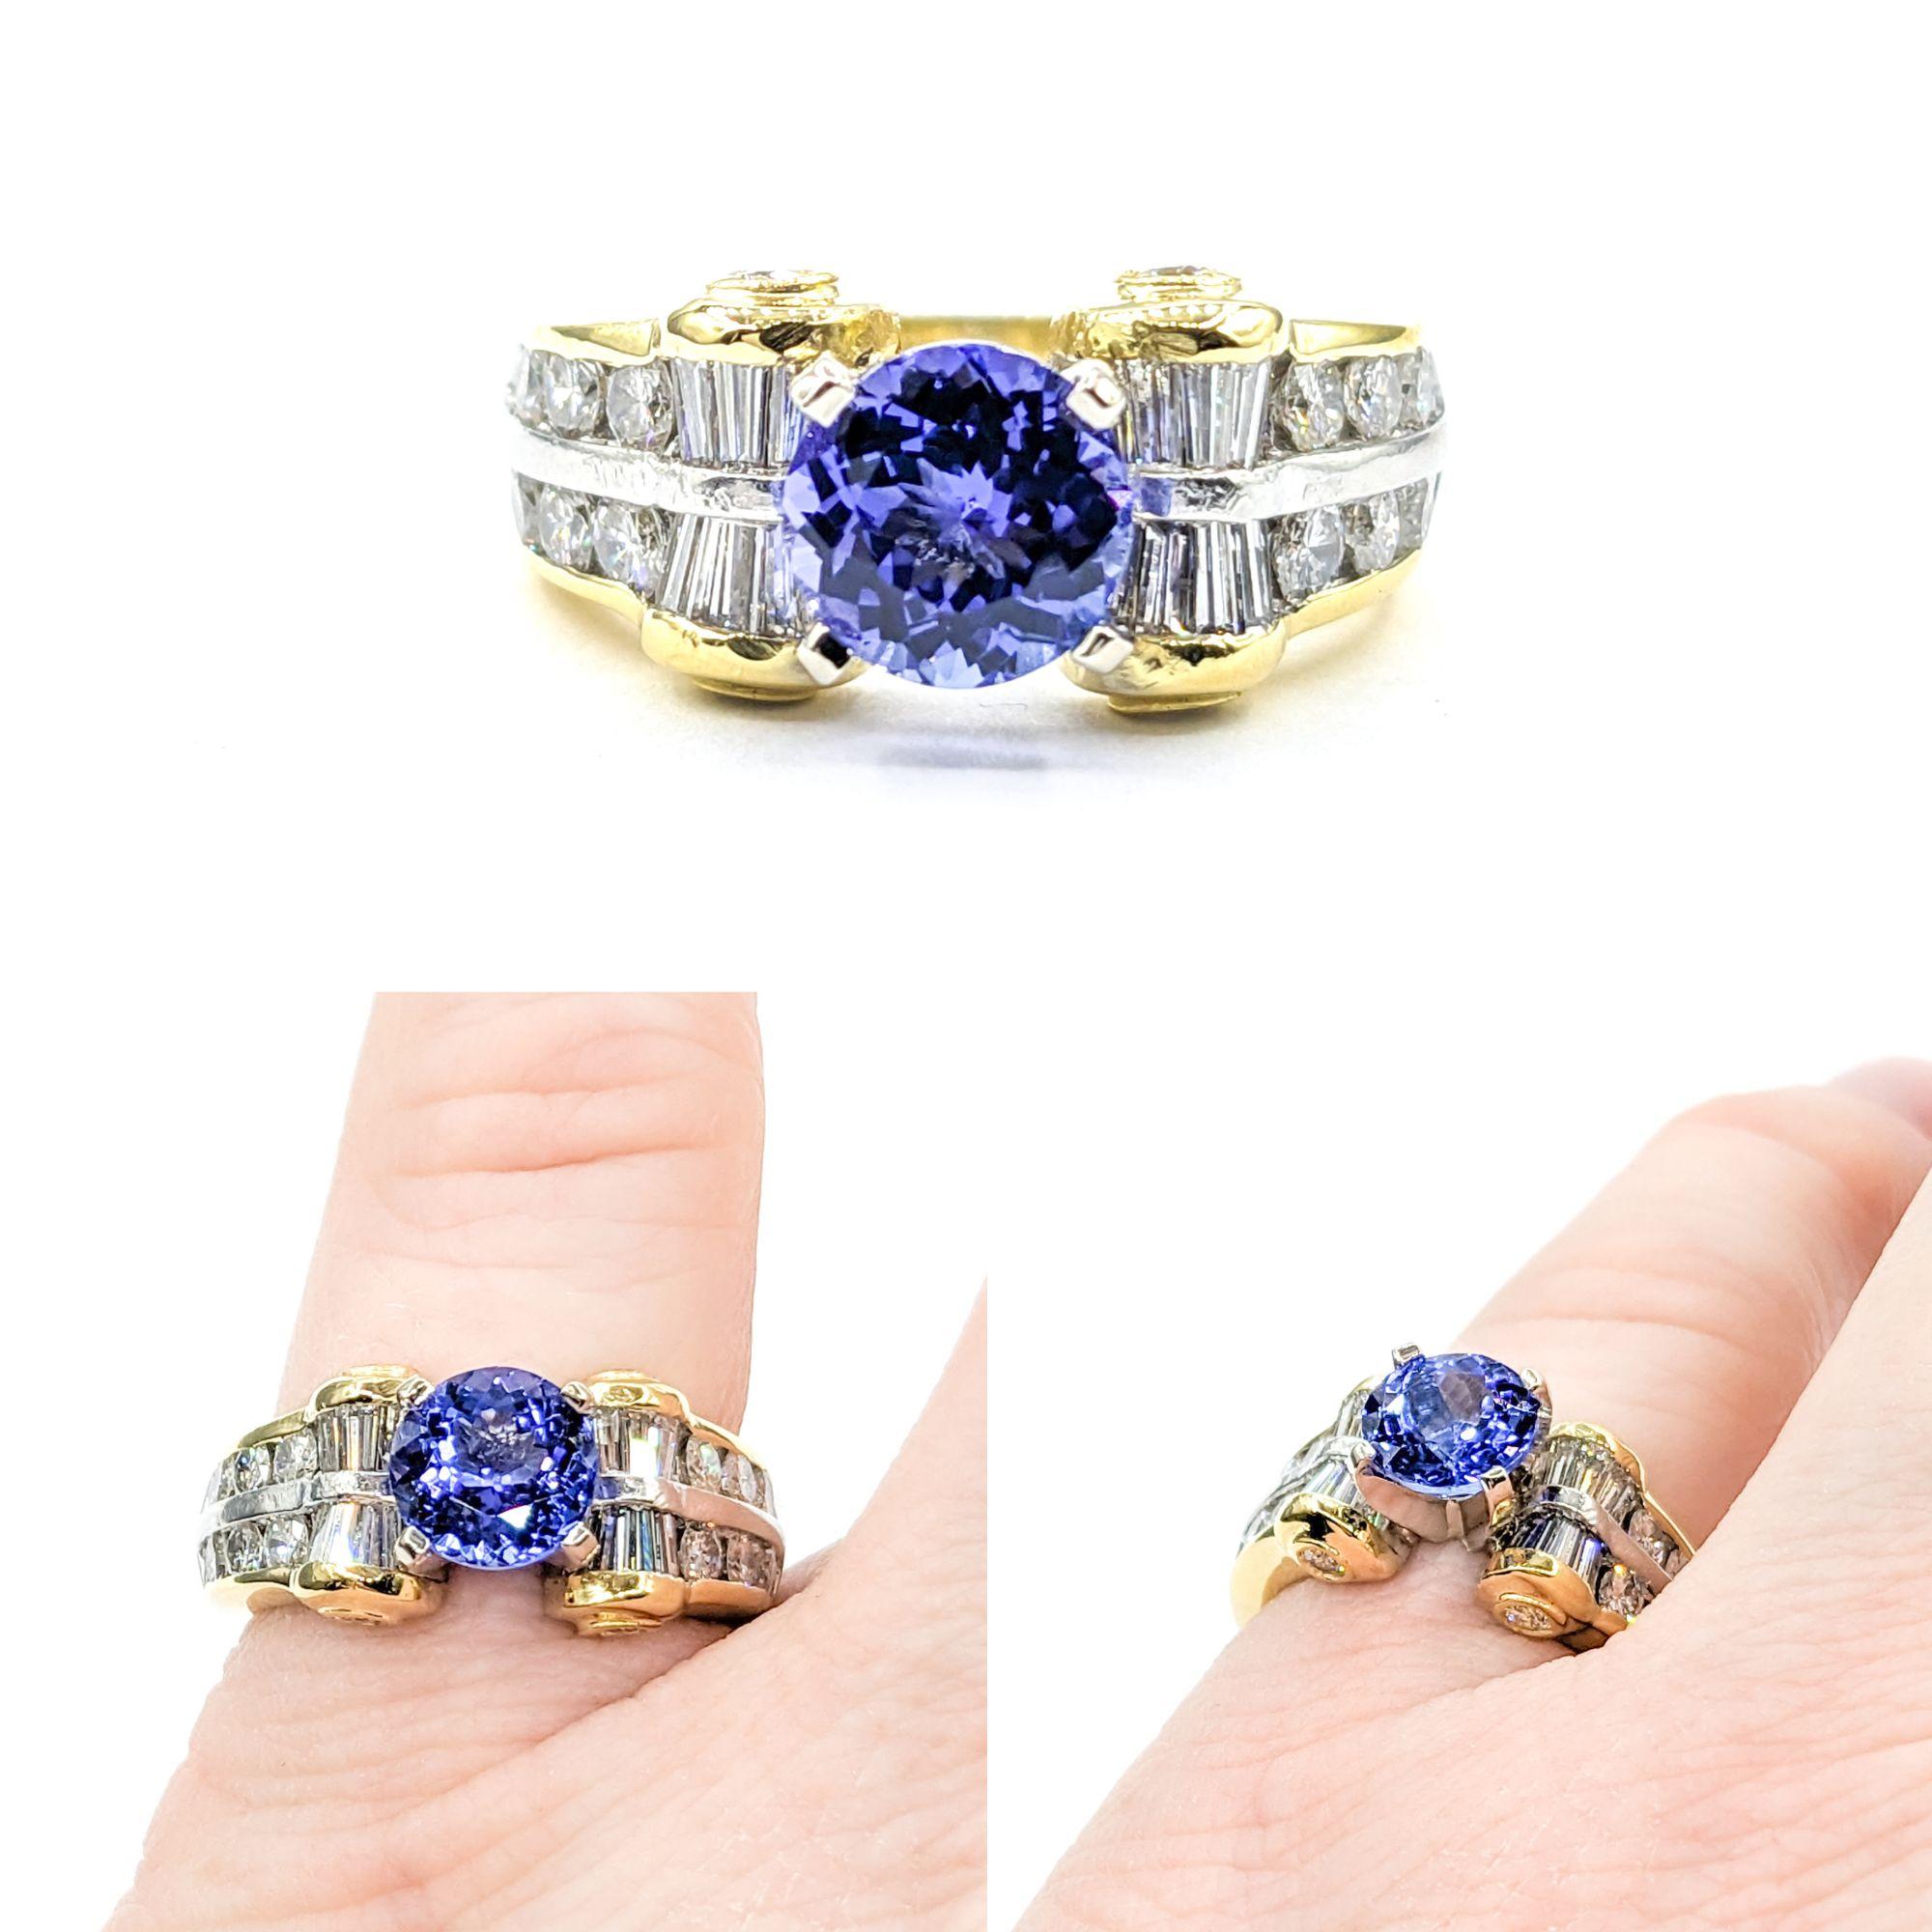 1.37ct Tanzanite & 1.16ctw Diamond Ring In Two-Tone Gold & Platinum

This exquisite Gemstone Fashion Ring, crafted in an elegant 18k tyellow gold and platinum two-tone design, showcases a captivating 1.37ct tanzanite centerpiece. Complemented by